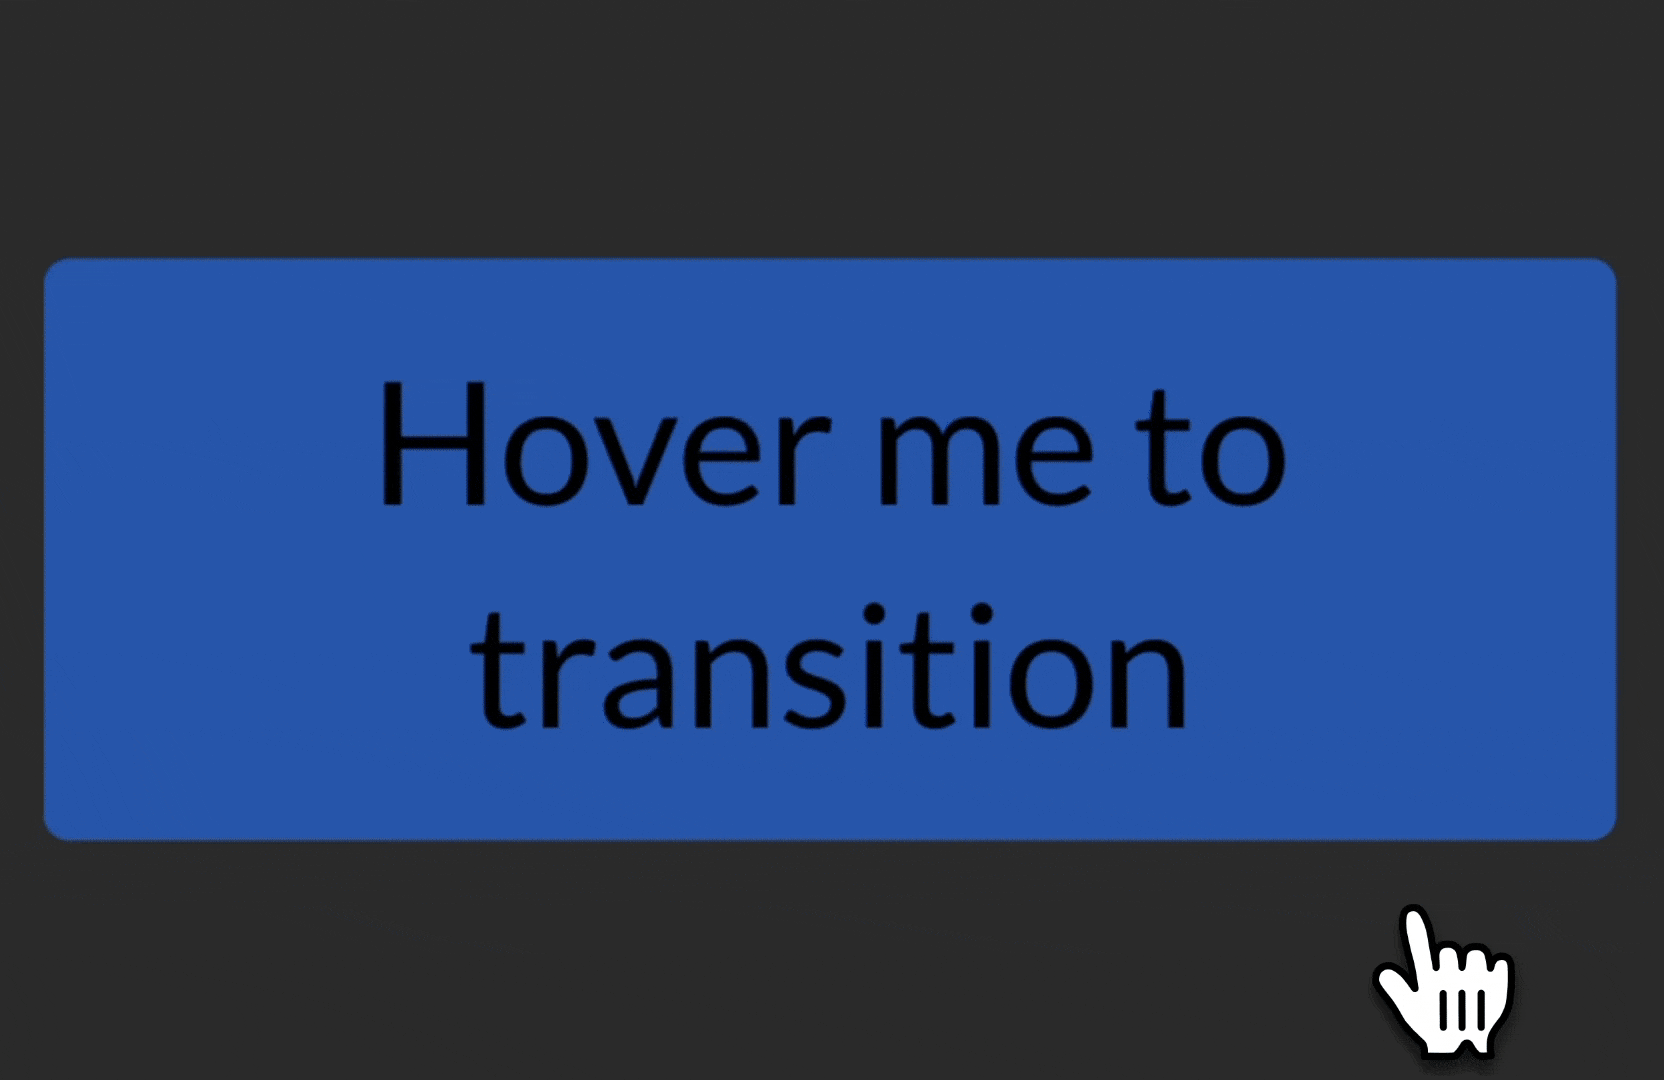 The initial background-color of the button will begin as a lighter blue, and when a user hovers, the transition to a darker blue will occur, as shown below.